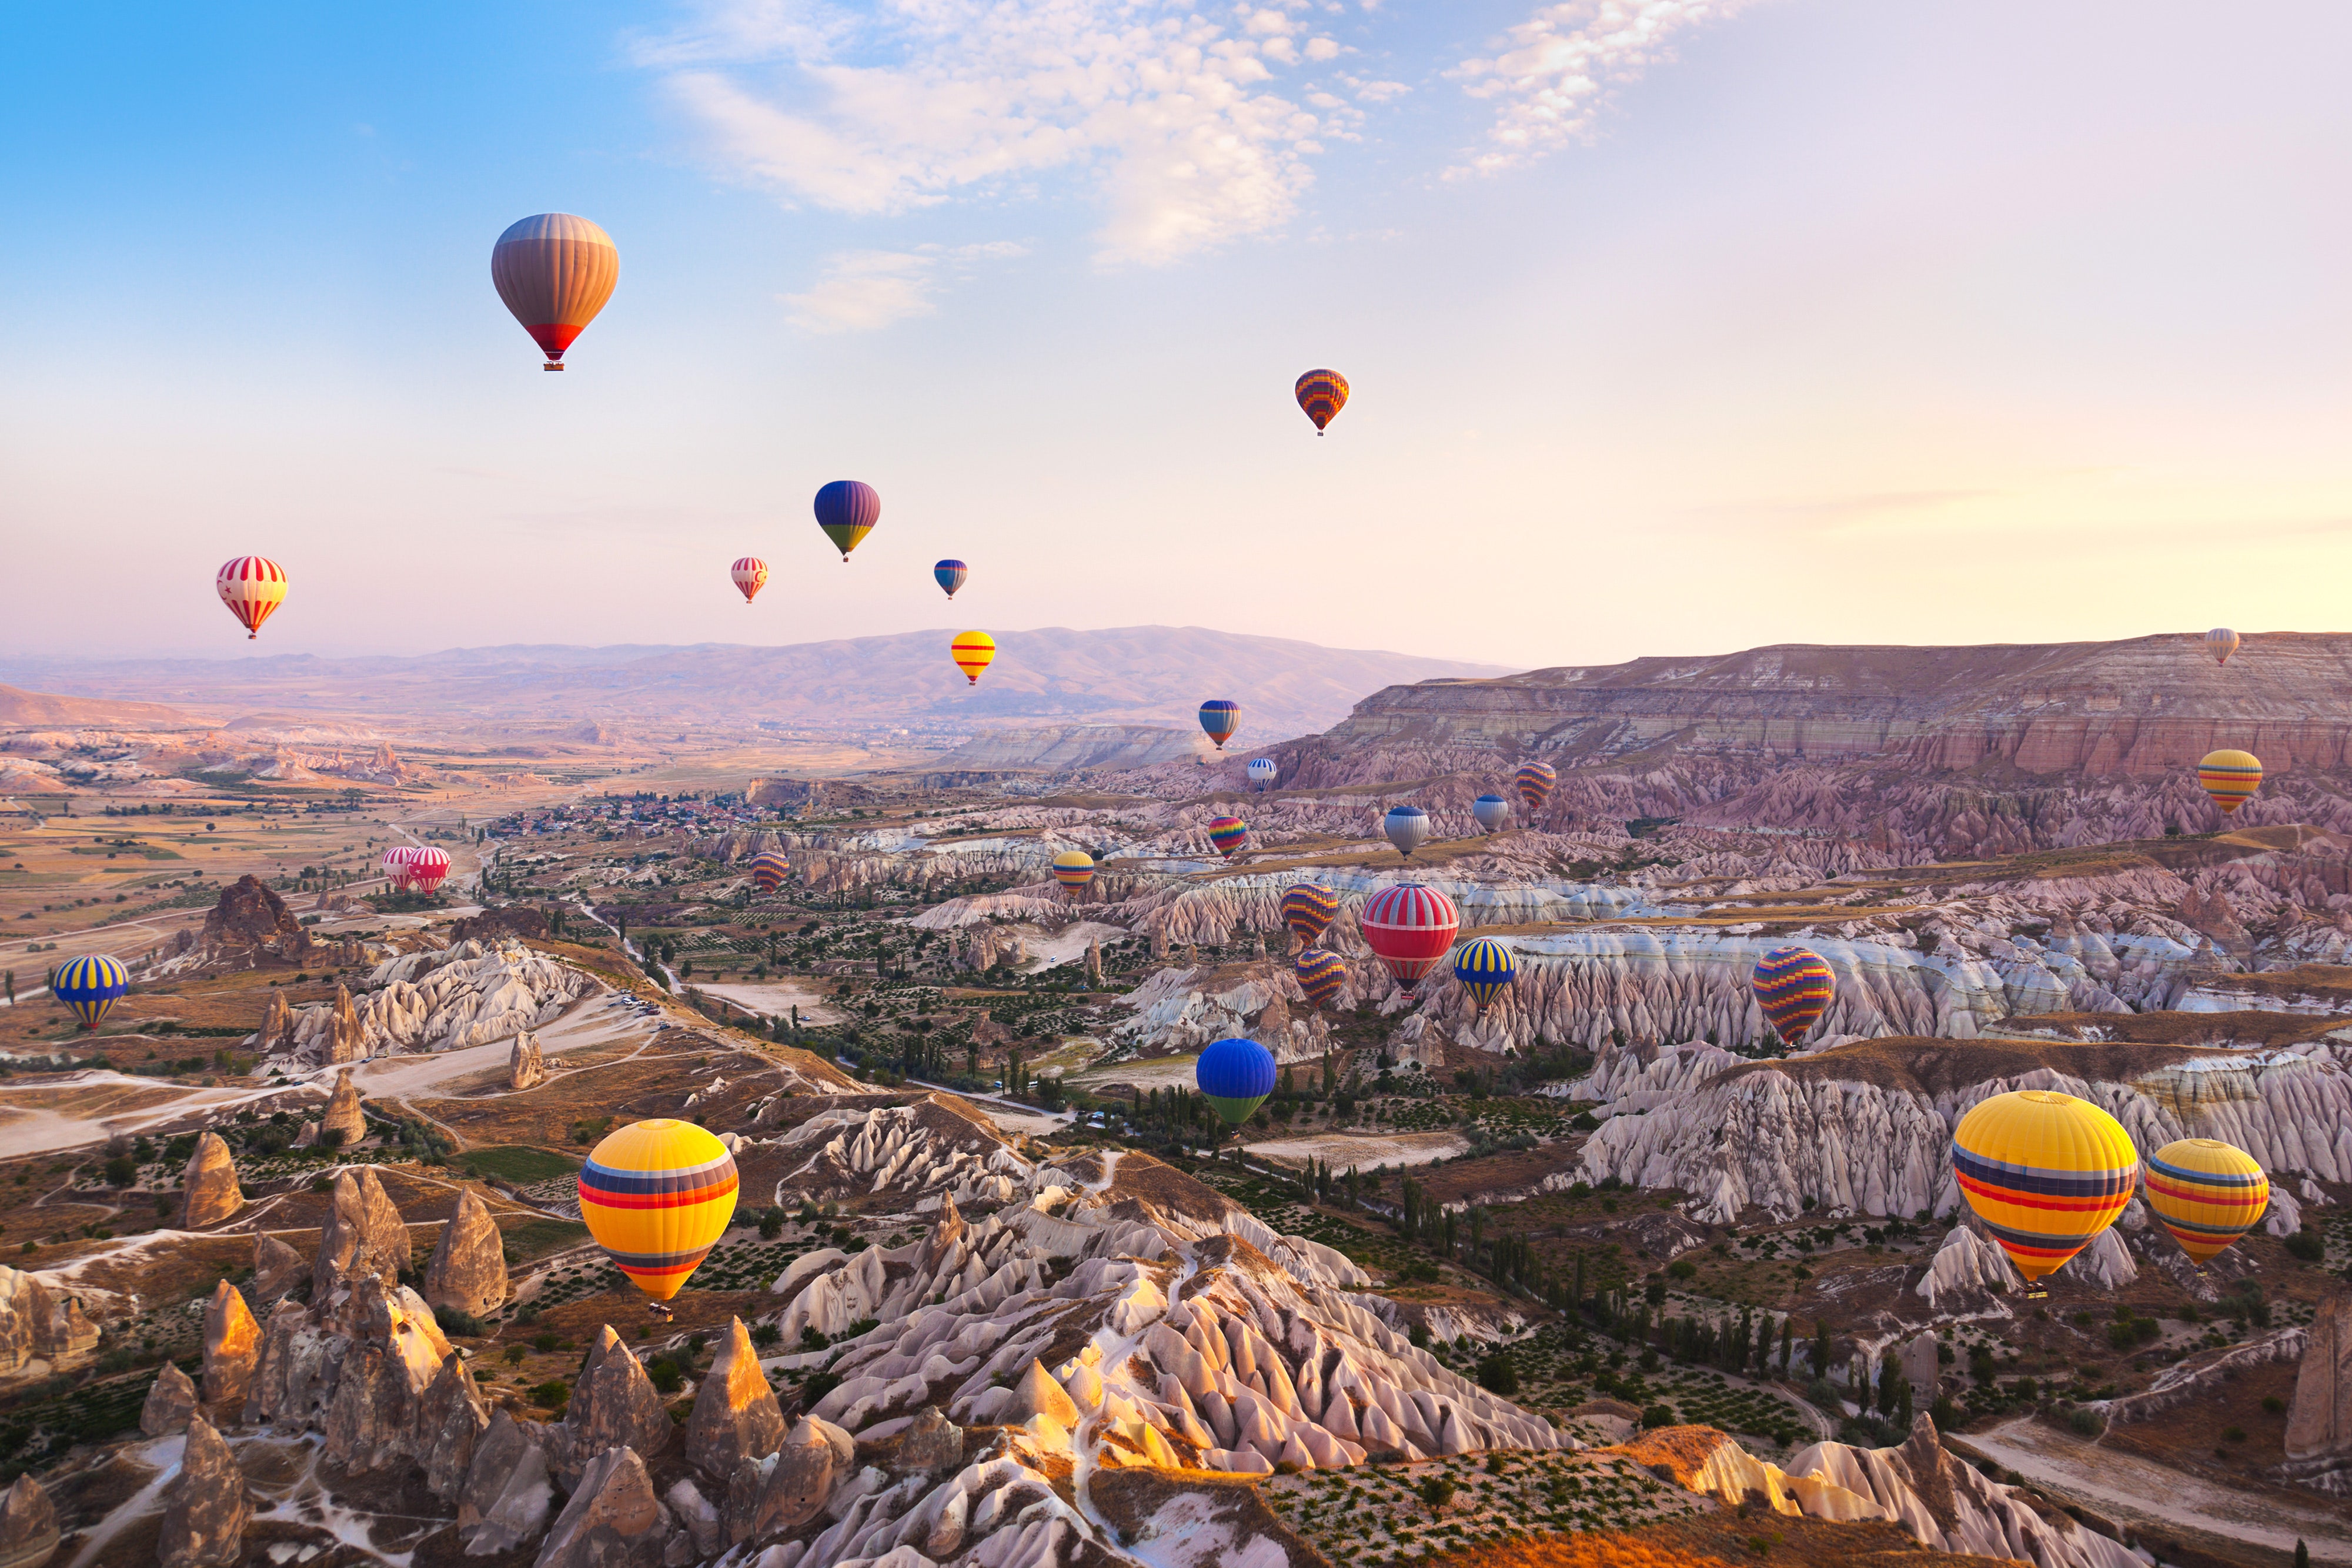 Cappadocia, an area in Turkey where entire cities have been carved into rock, is pretty incredible on its own. But whenever hot air balloons pepper the sky—with many floating up right at sunrise—its beauty level literally skyrockets.<p>Sign up to receive the latest news, expert tips, and inspiration on all things travel</p><a href="https://www.cntraveler.com/newsletter/the-daily?sourceCode=msnsend">Inspire Me</a>